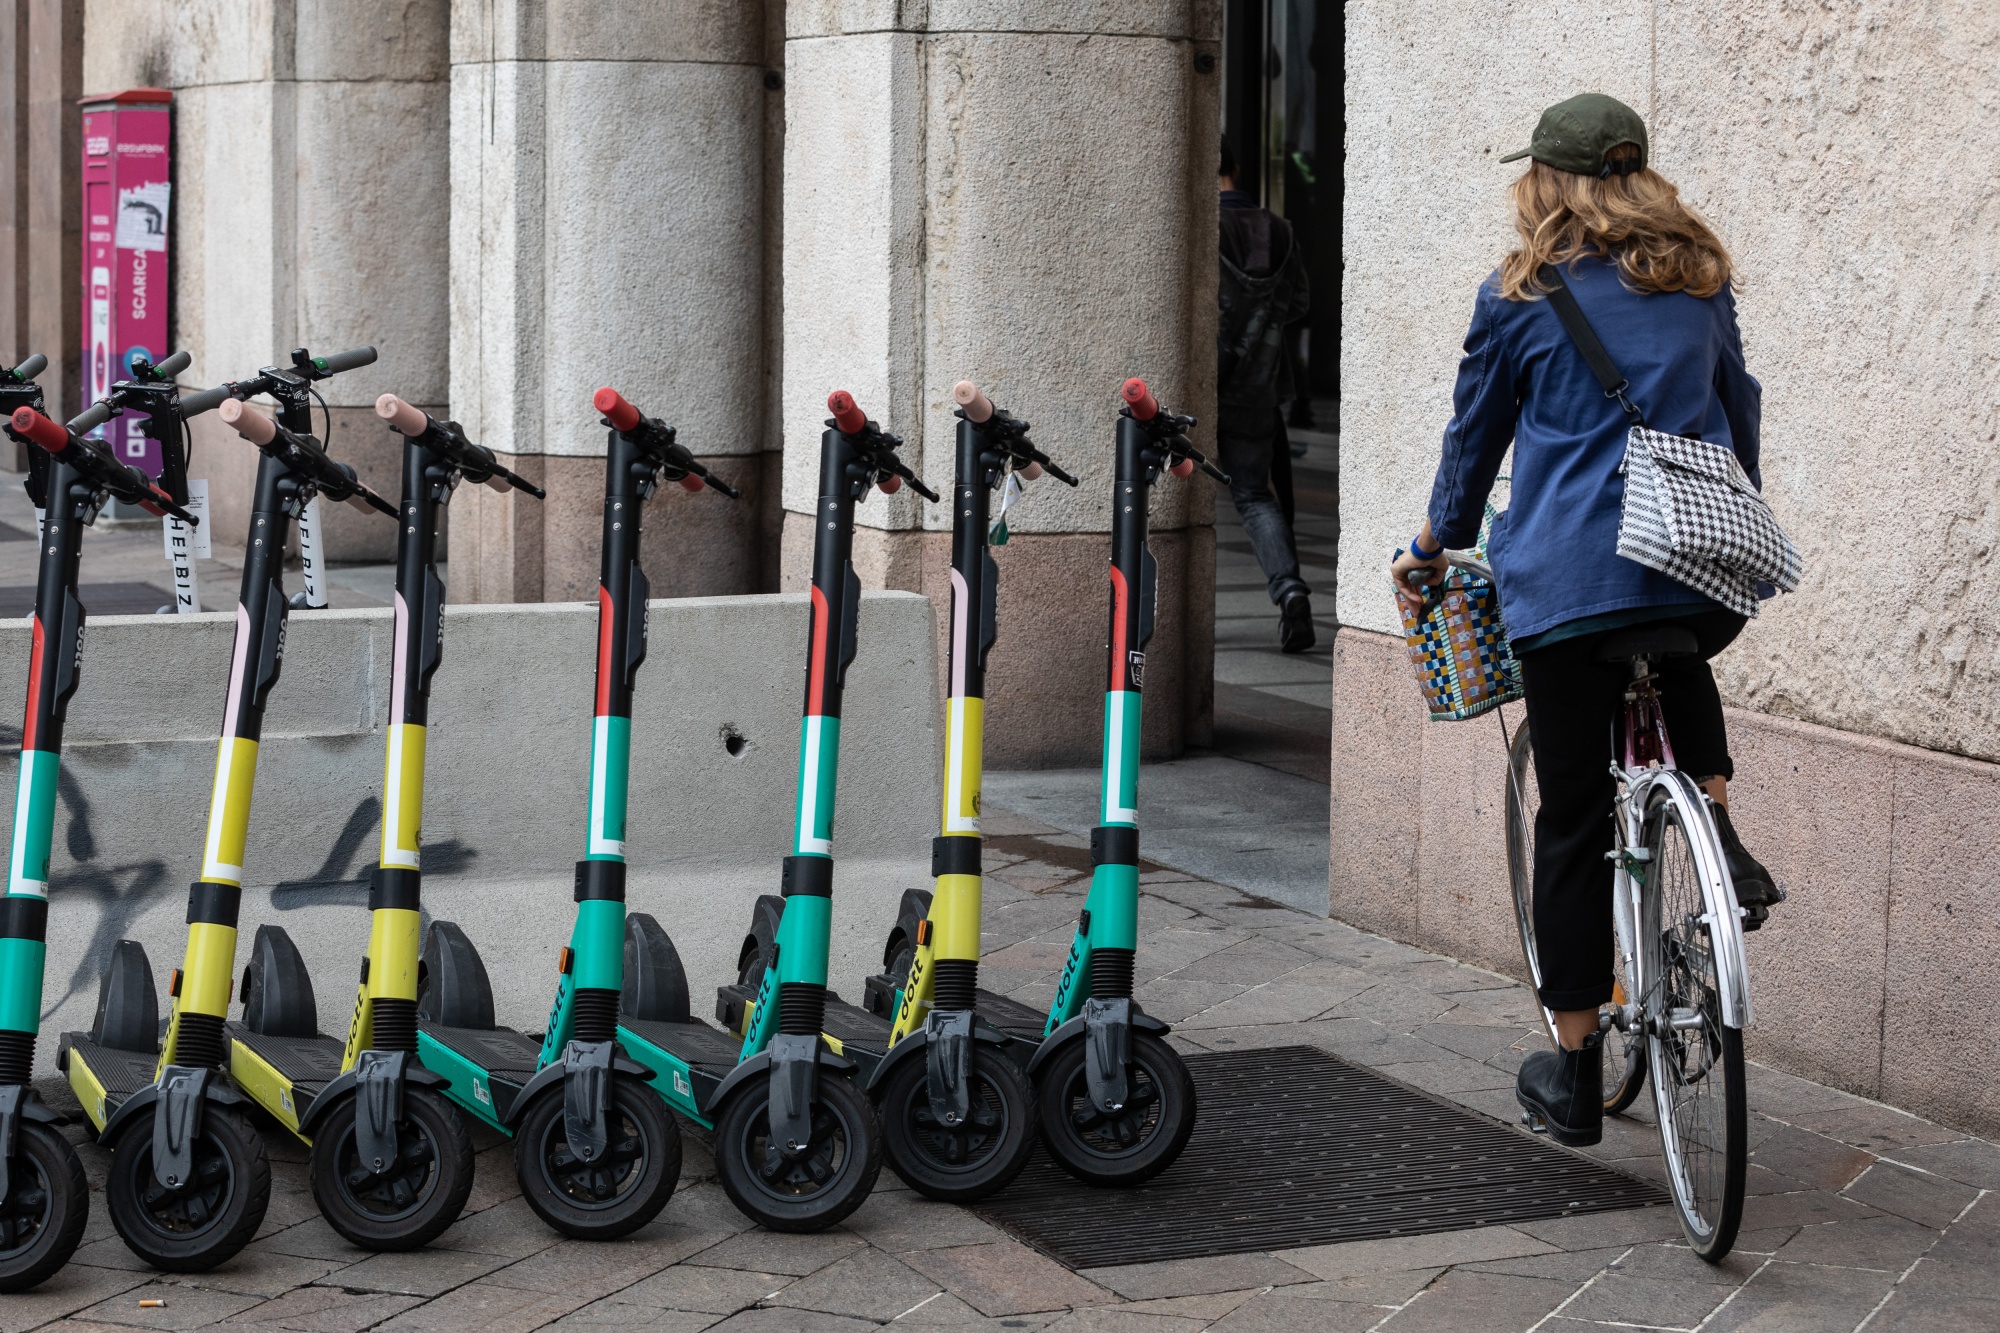 Italy Plans E-Scooter Crack Down, New Safety Rules - Bloomberg